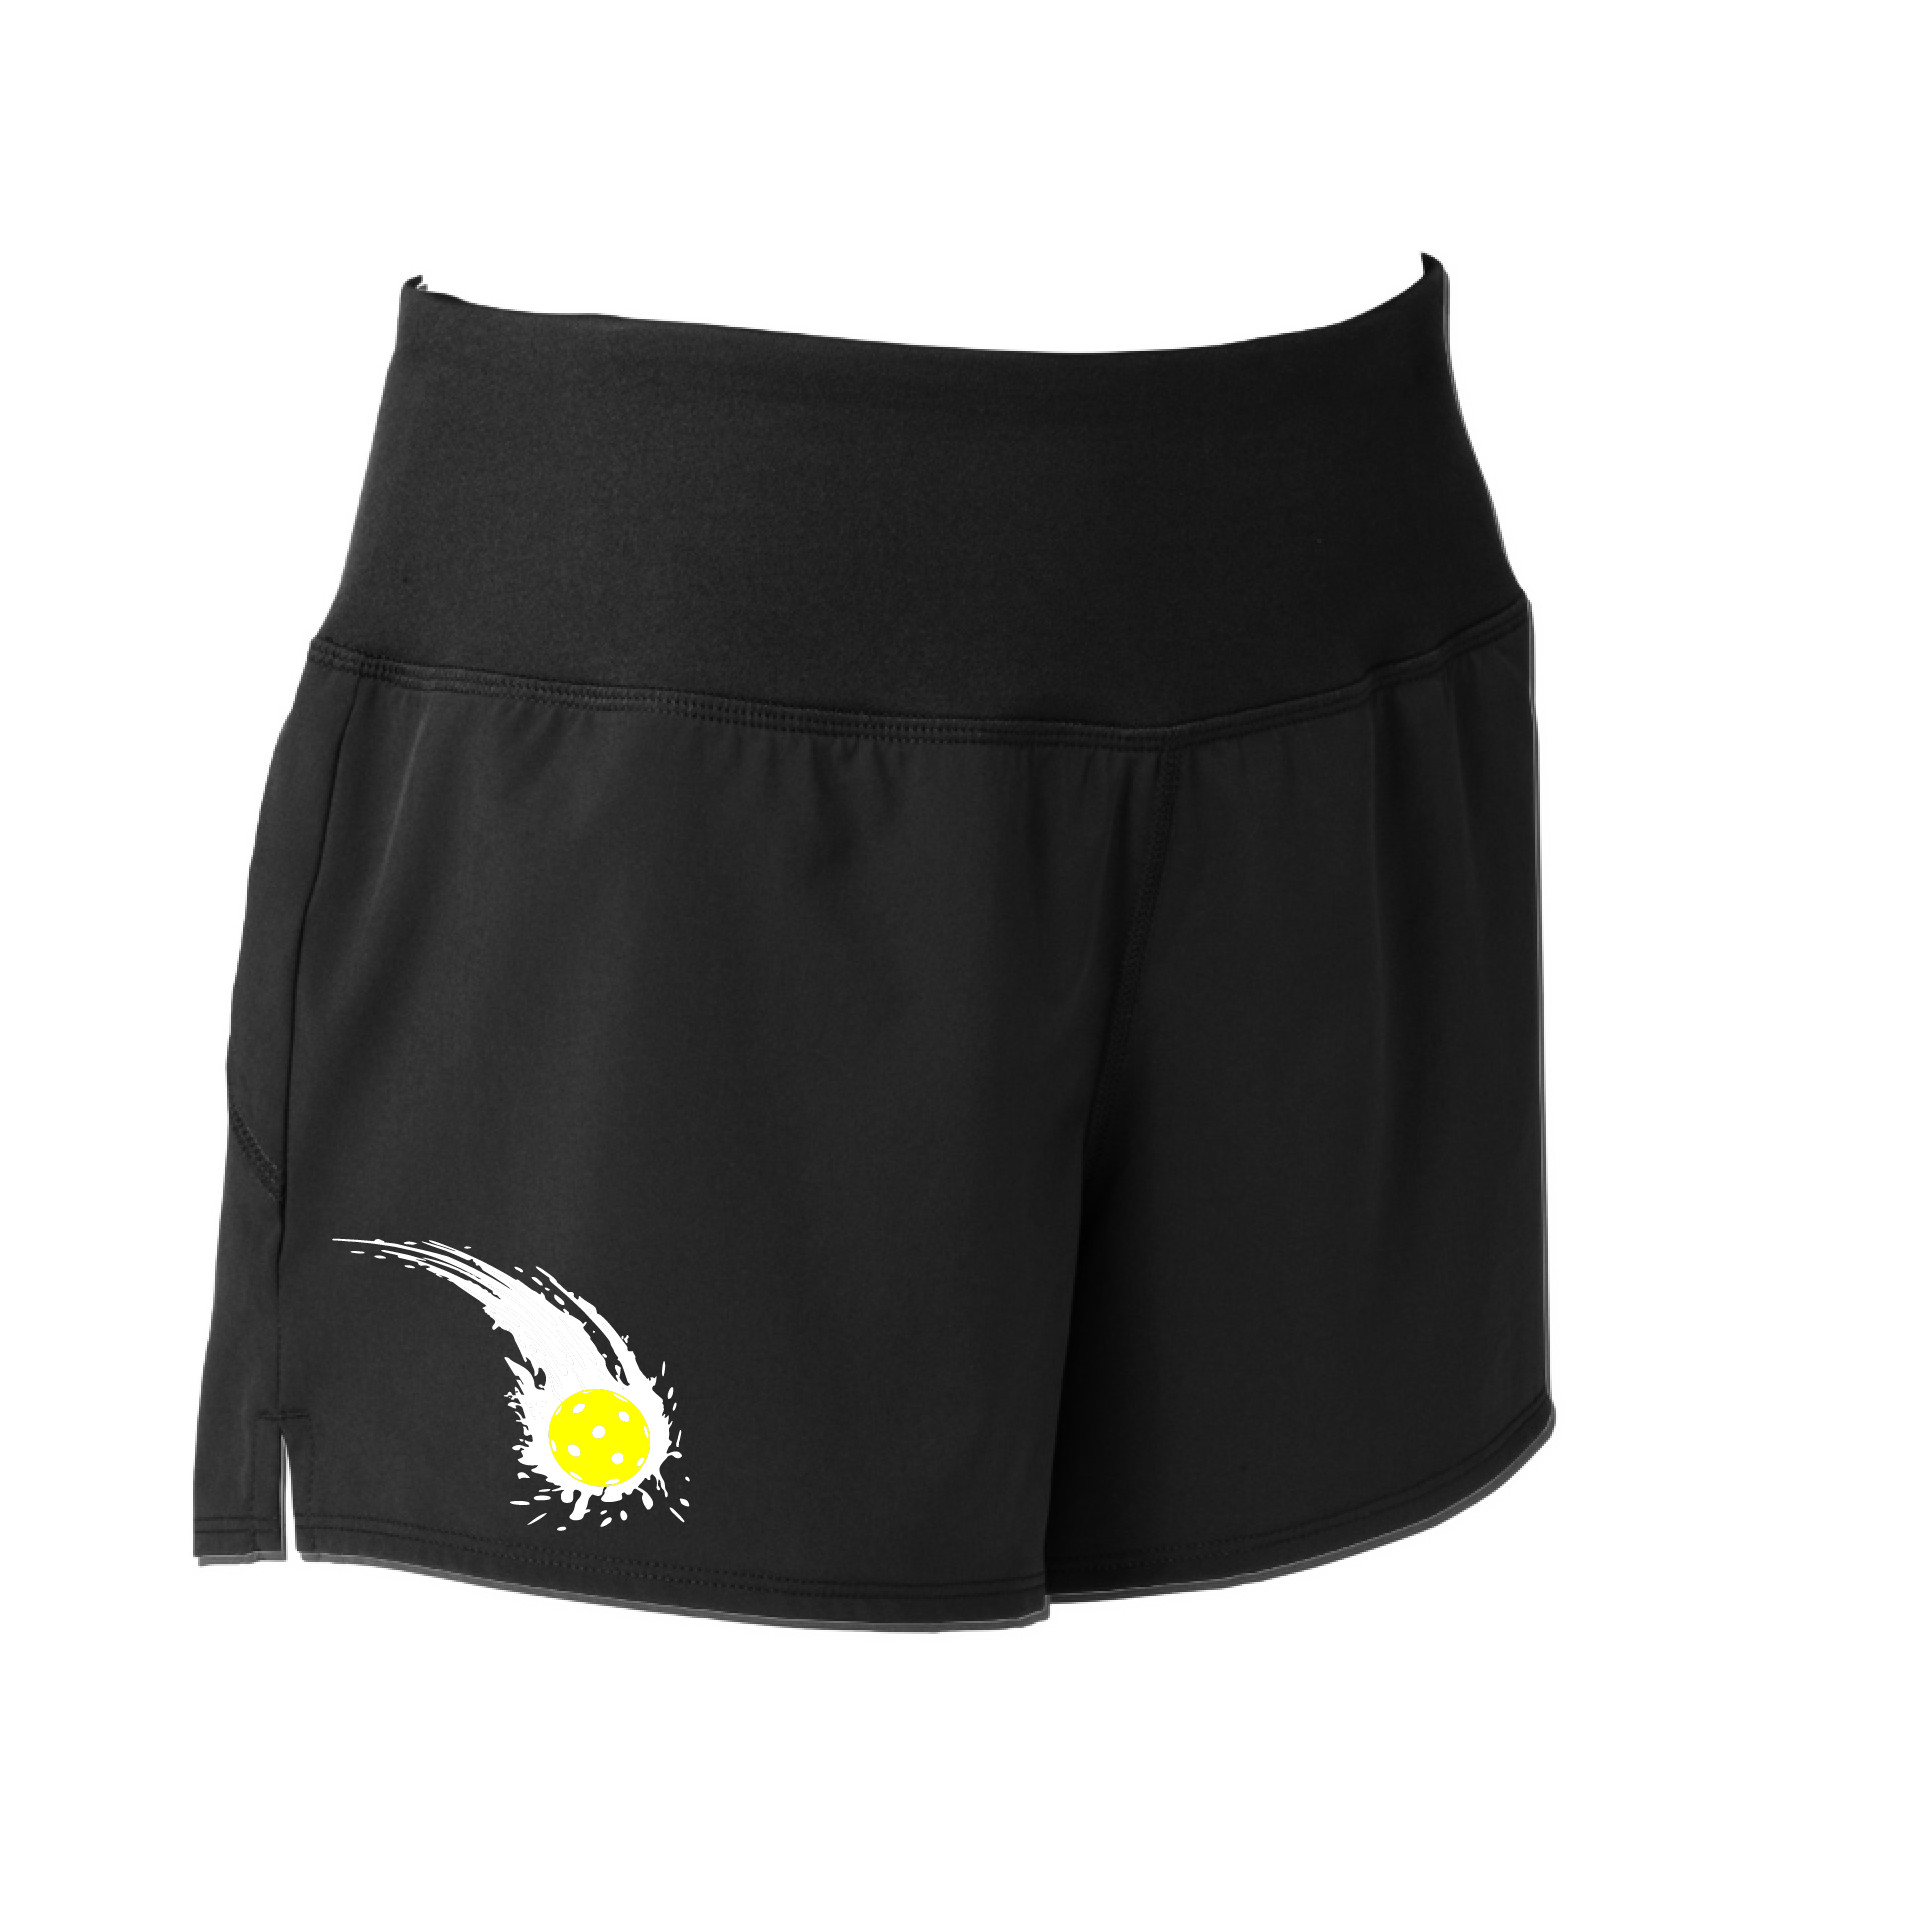 Pickleball Shorts Designs: Pickleball Impact  Sport Tek women’s repeat shorts come with built-in cell phone pocket on the exterior of the waistband. You can also feel secure knowing that no matter how strenuous the exercise, the shorts will remain in place (it won’t ride up!). These shorts are extremely versatile and trendy. Transition from the Pickleball court to running errands smoothly.